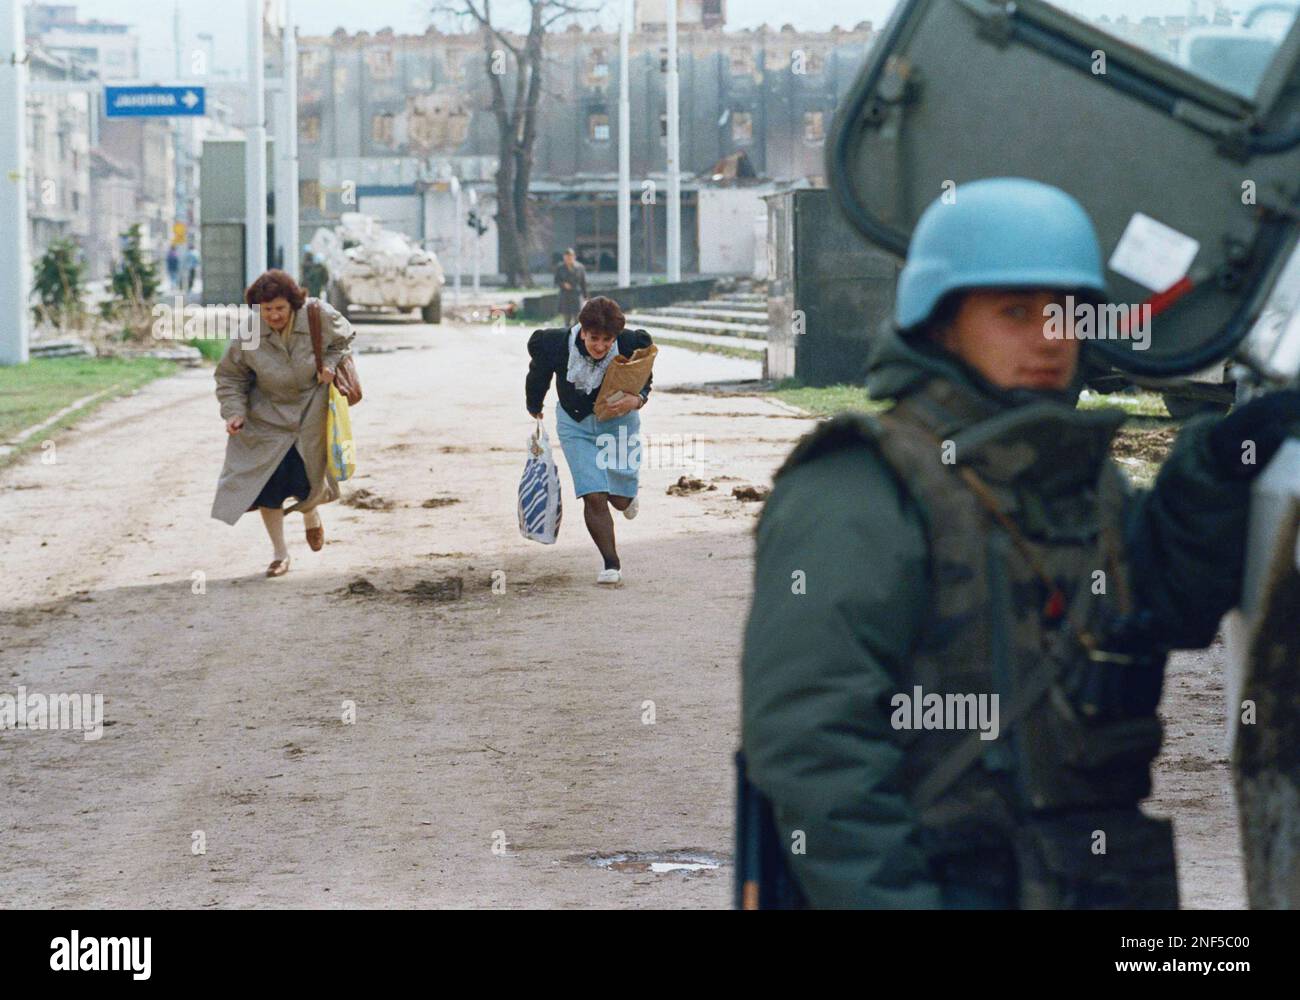 Two residents run along the notorious "Sniper Alley" in Sarajevo trying to evade snipers, April 18, 1995, while a French soldier stands protected by his armored vehicle. Tensions have been high in the Bosnian capital after the killings of two French peacekeepers last week. (AP Photo/Rikard Larma) Stock Photo